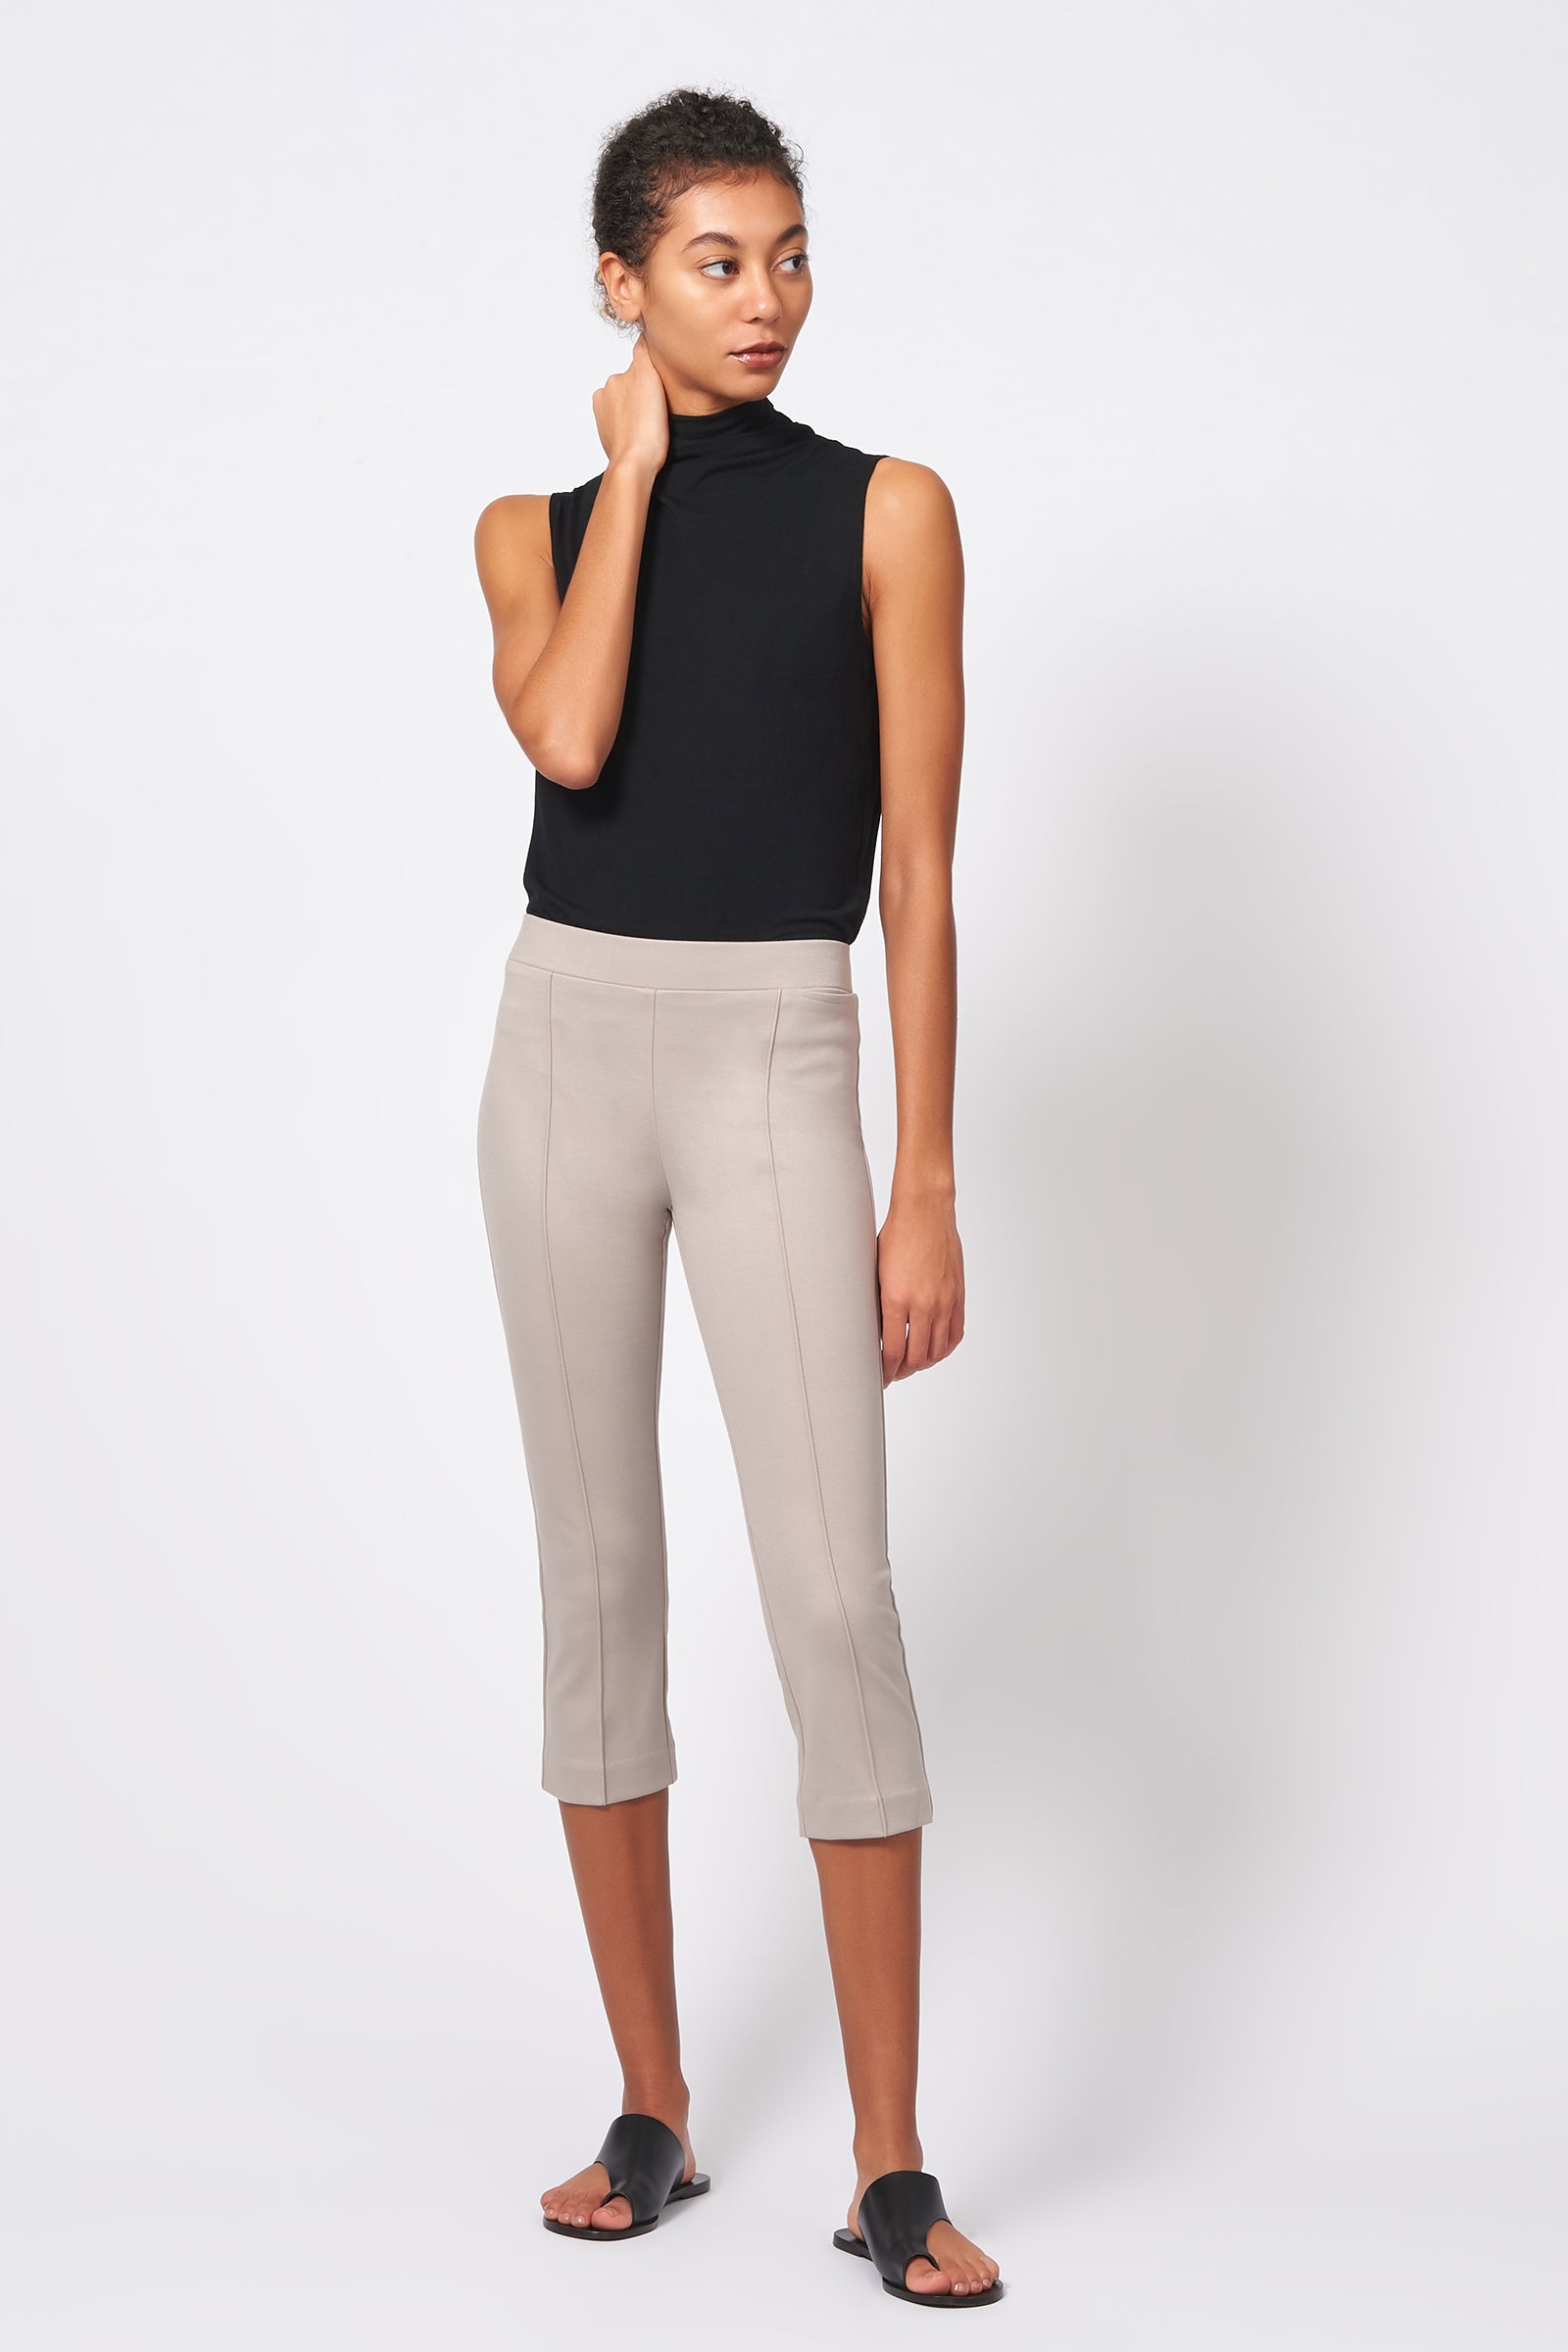 Kal Rieman Pintuck Ponte 3/4 Pant in Taupe on Model Full Front View